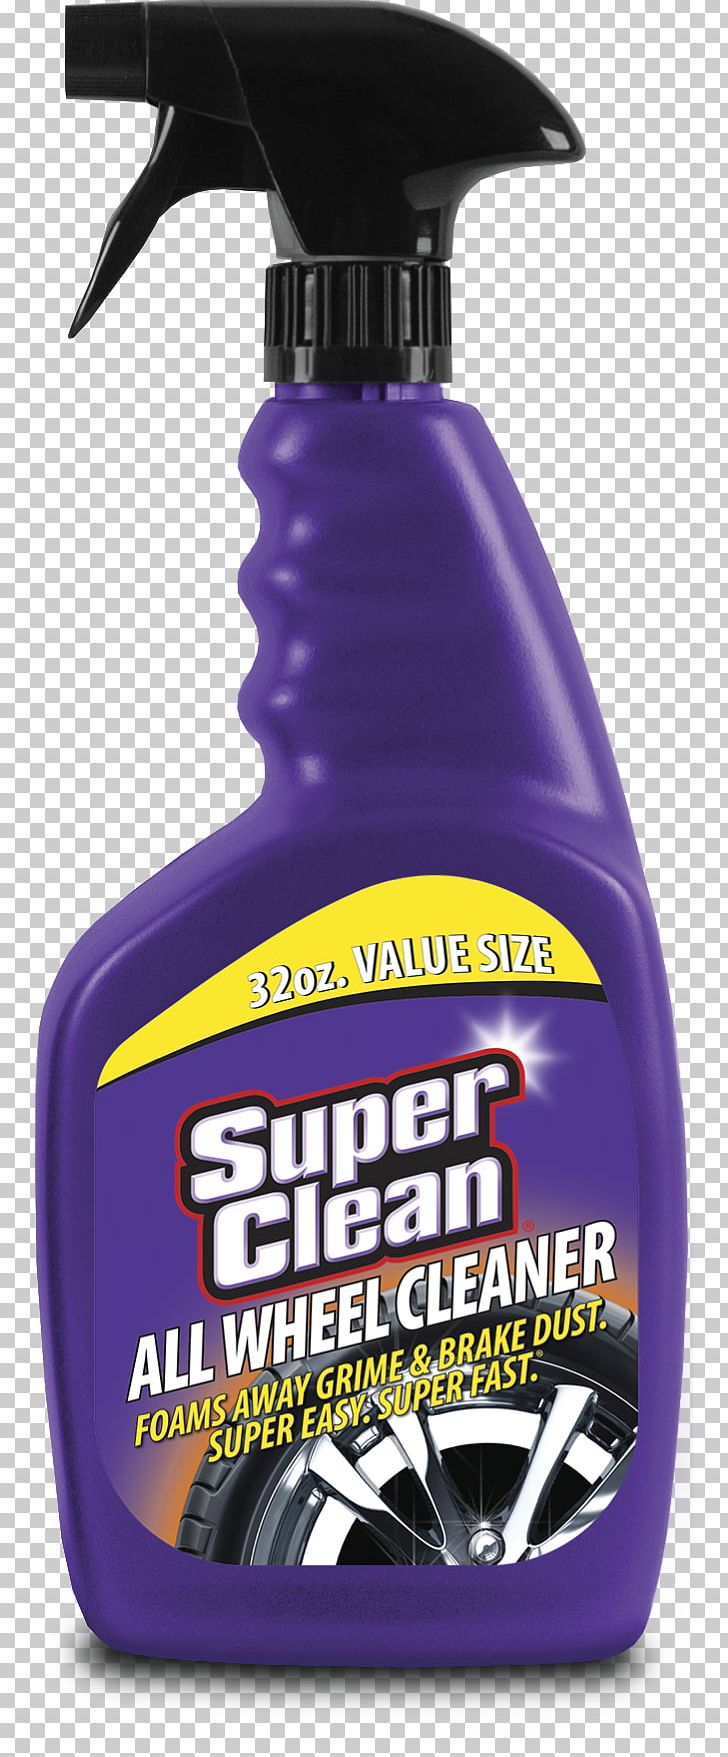 Cleaning Agent Cleaner Car Industry PNG, Clipart, Car, Carpet Cleaning, Cleaner, Cleaning, Cleaning Agent Free PNG Download